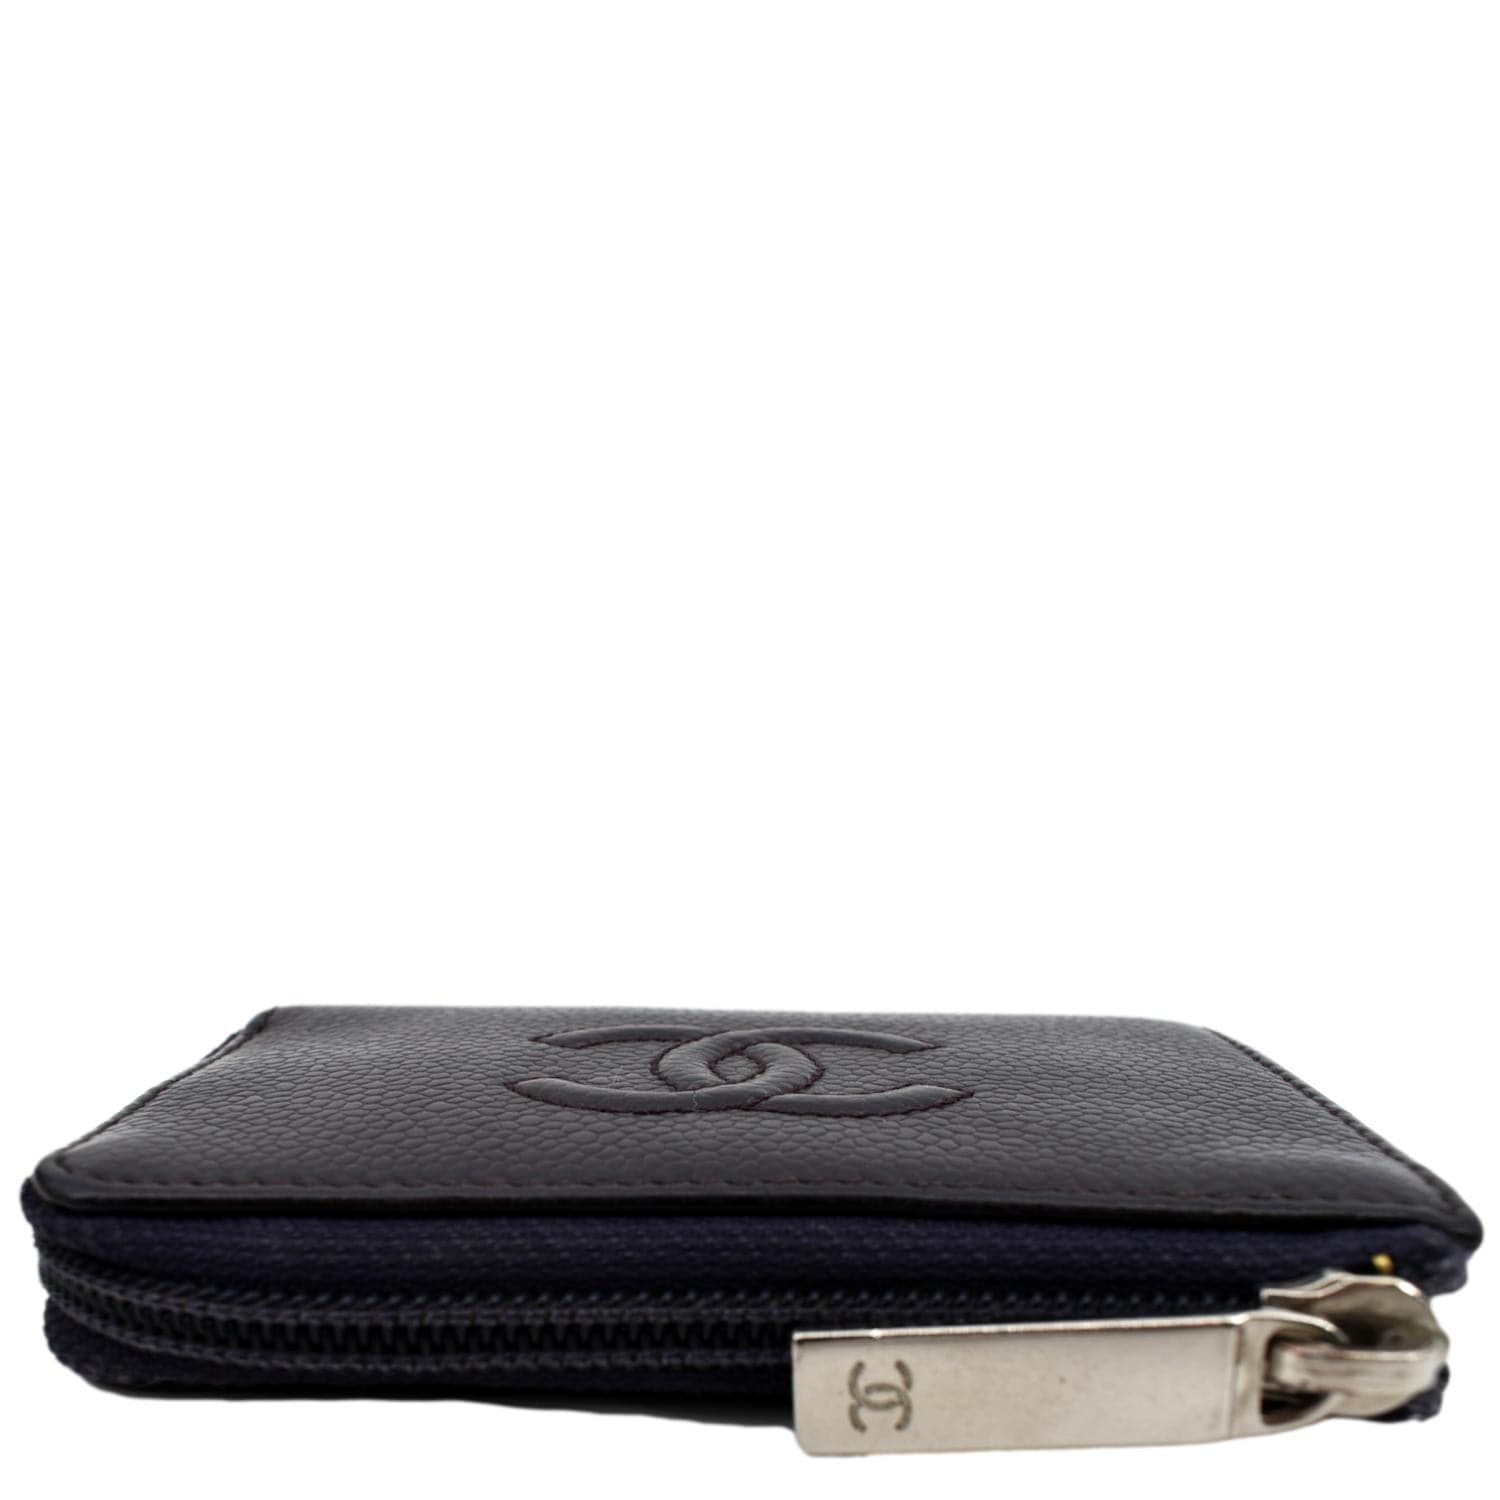 Chanel Mini O Case and Gucci Ophidia Key Pouch